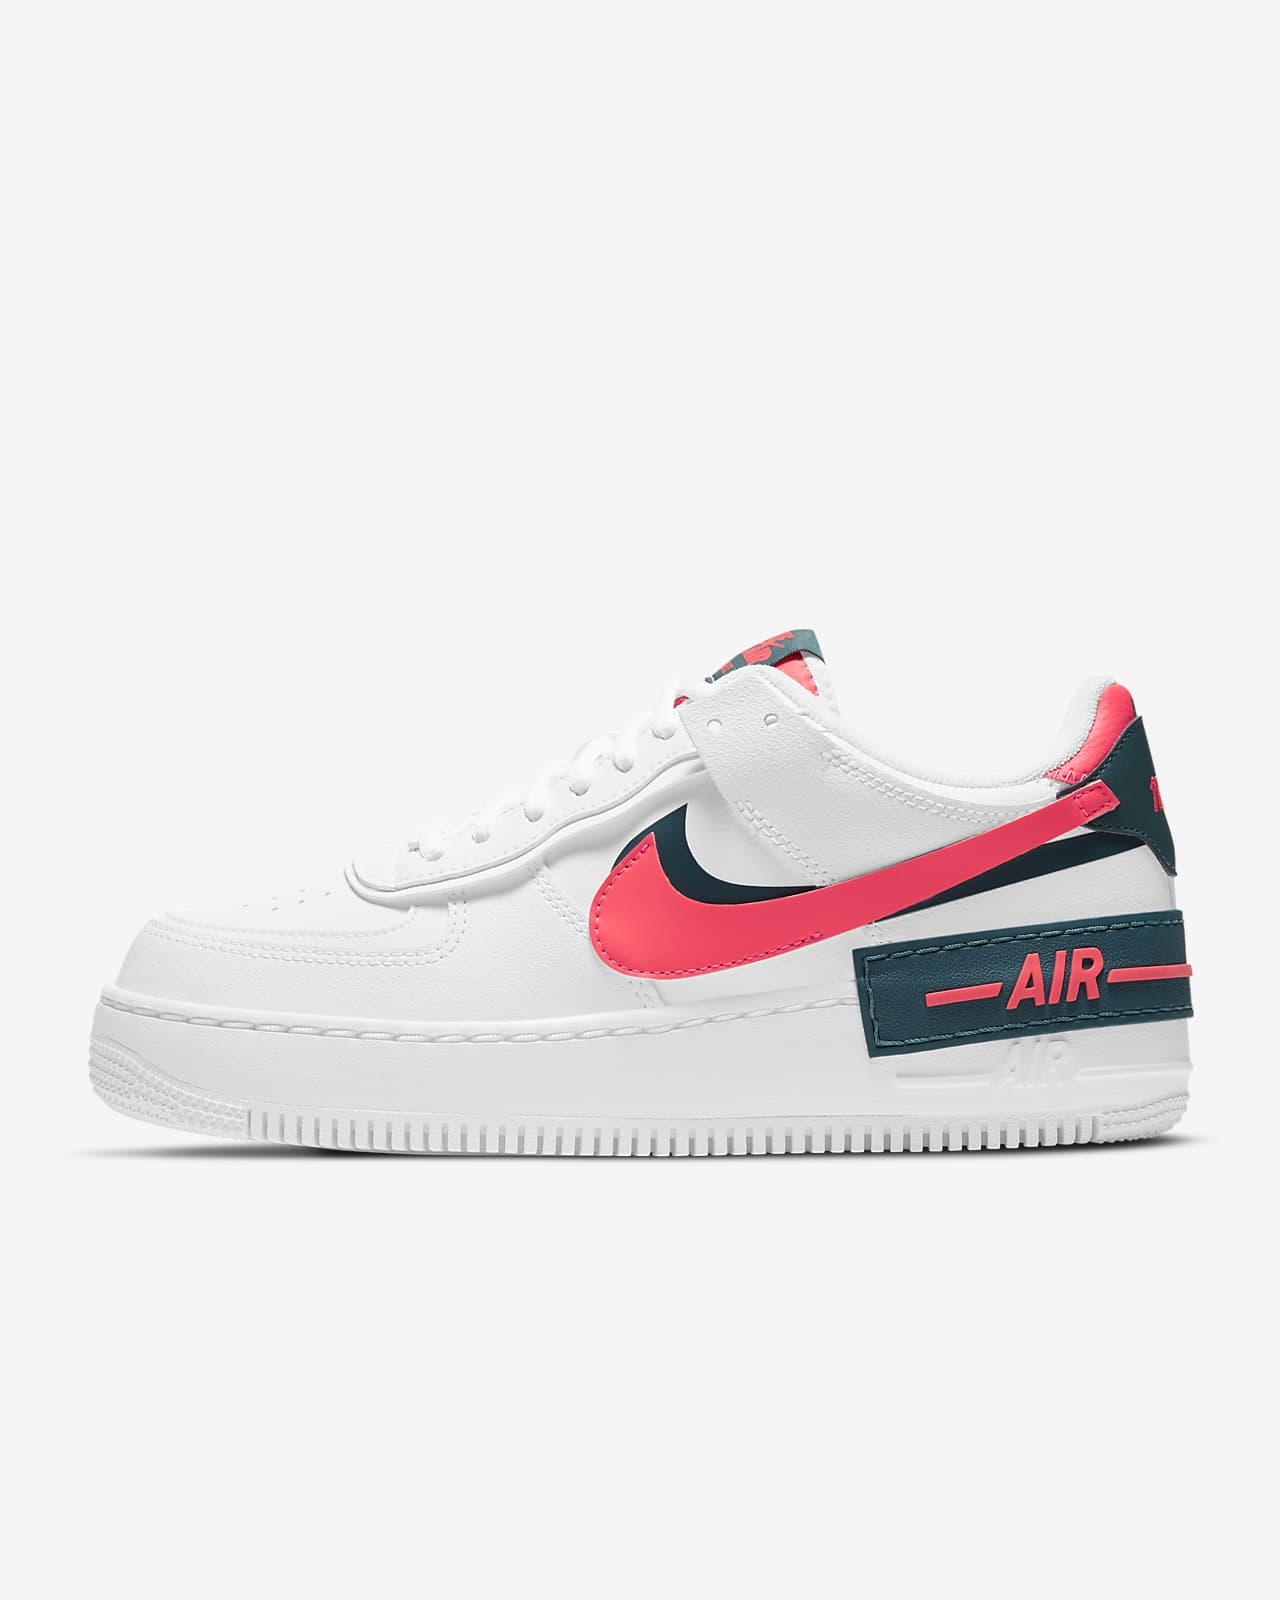 nike air force 1 shadow size 7